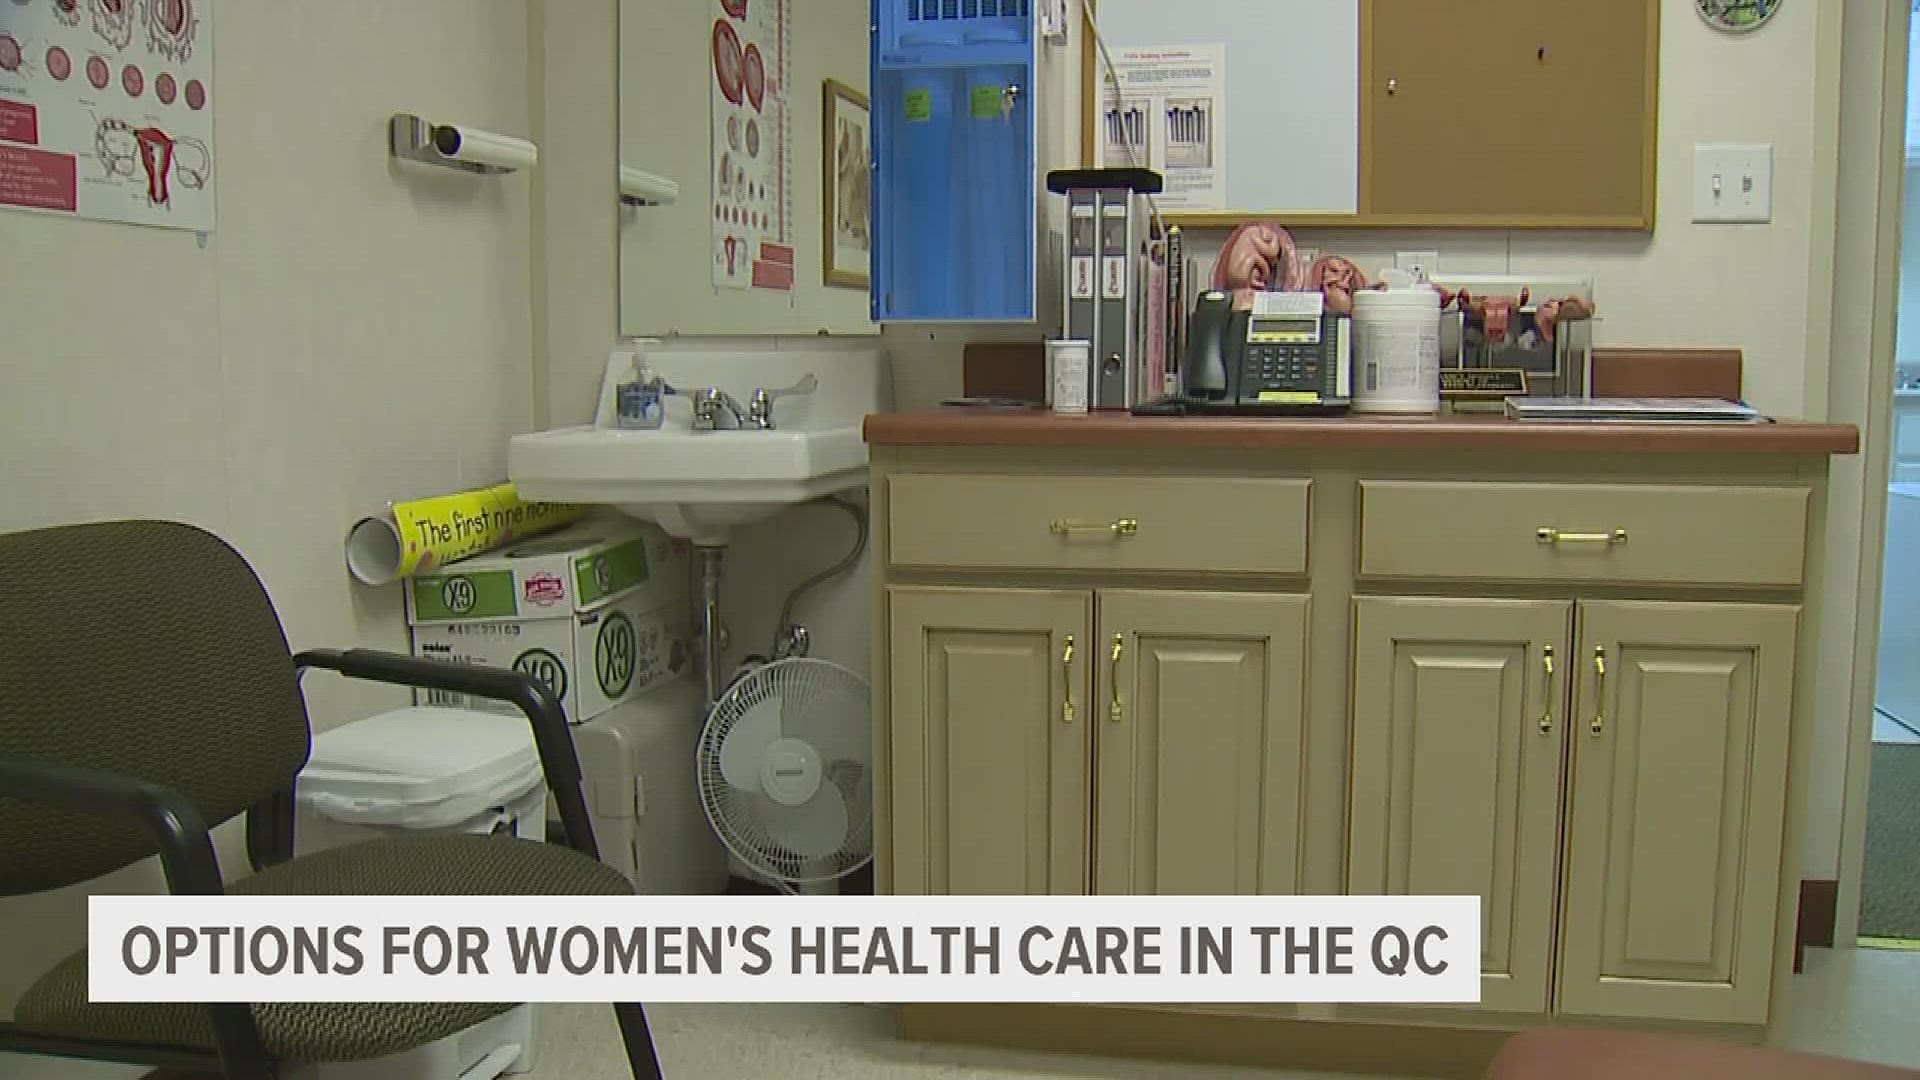 The reversal of Roe V. Wade is changing access to women's health resources nationwide; resources that have been scarce in the Quad Cities for nearly a decade.